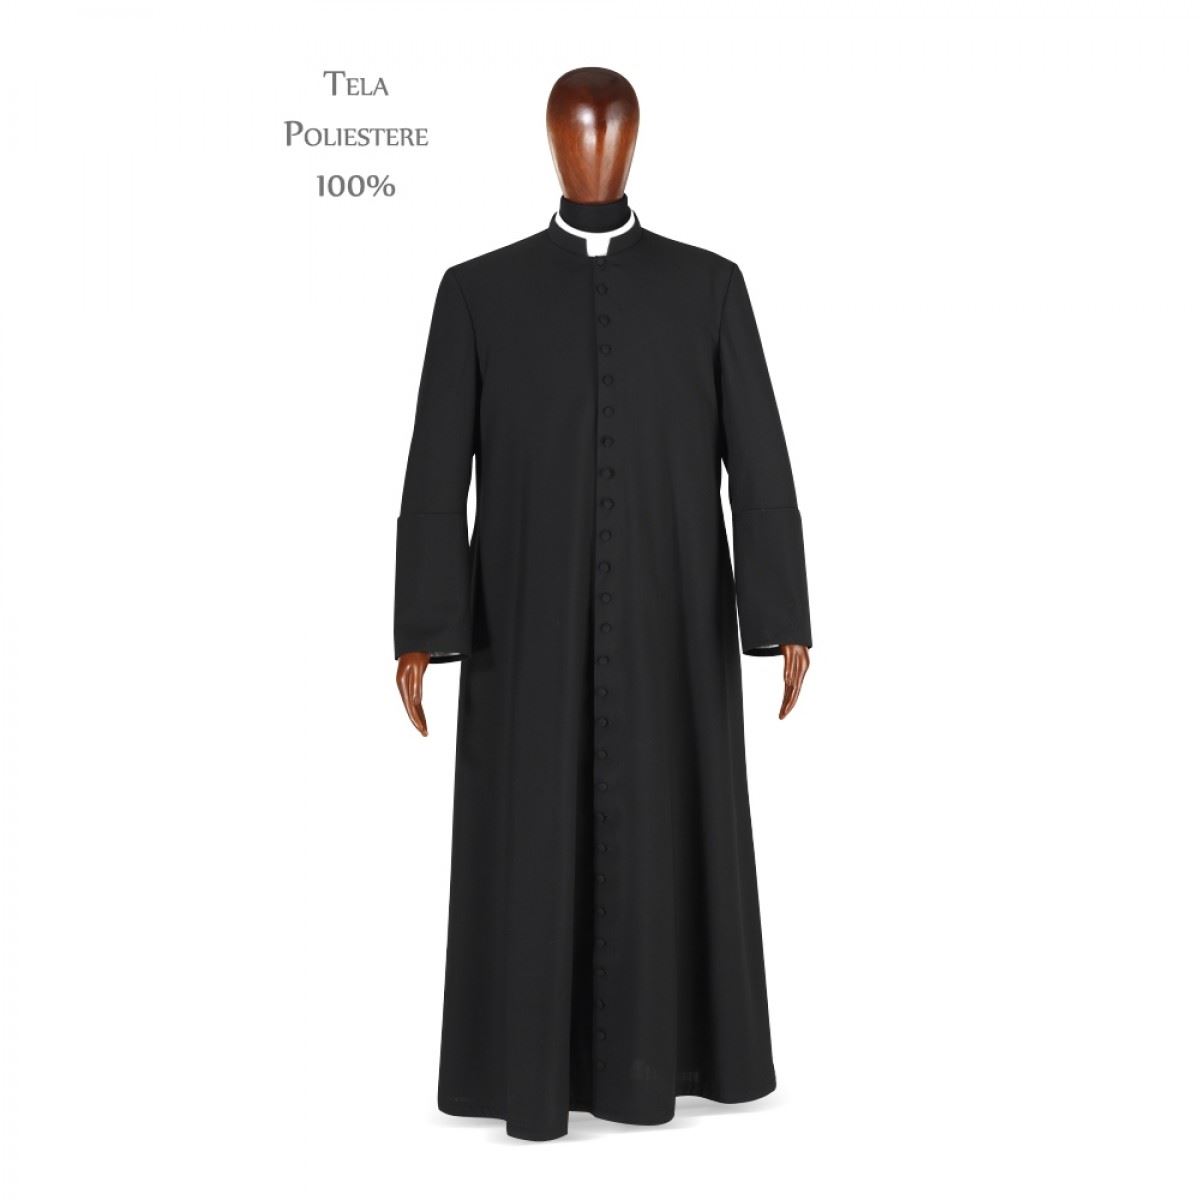 Roman Cassock 100% Polyester, Made in Italy